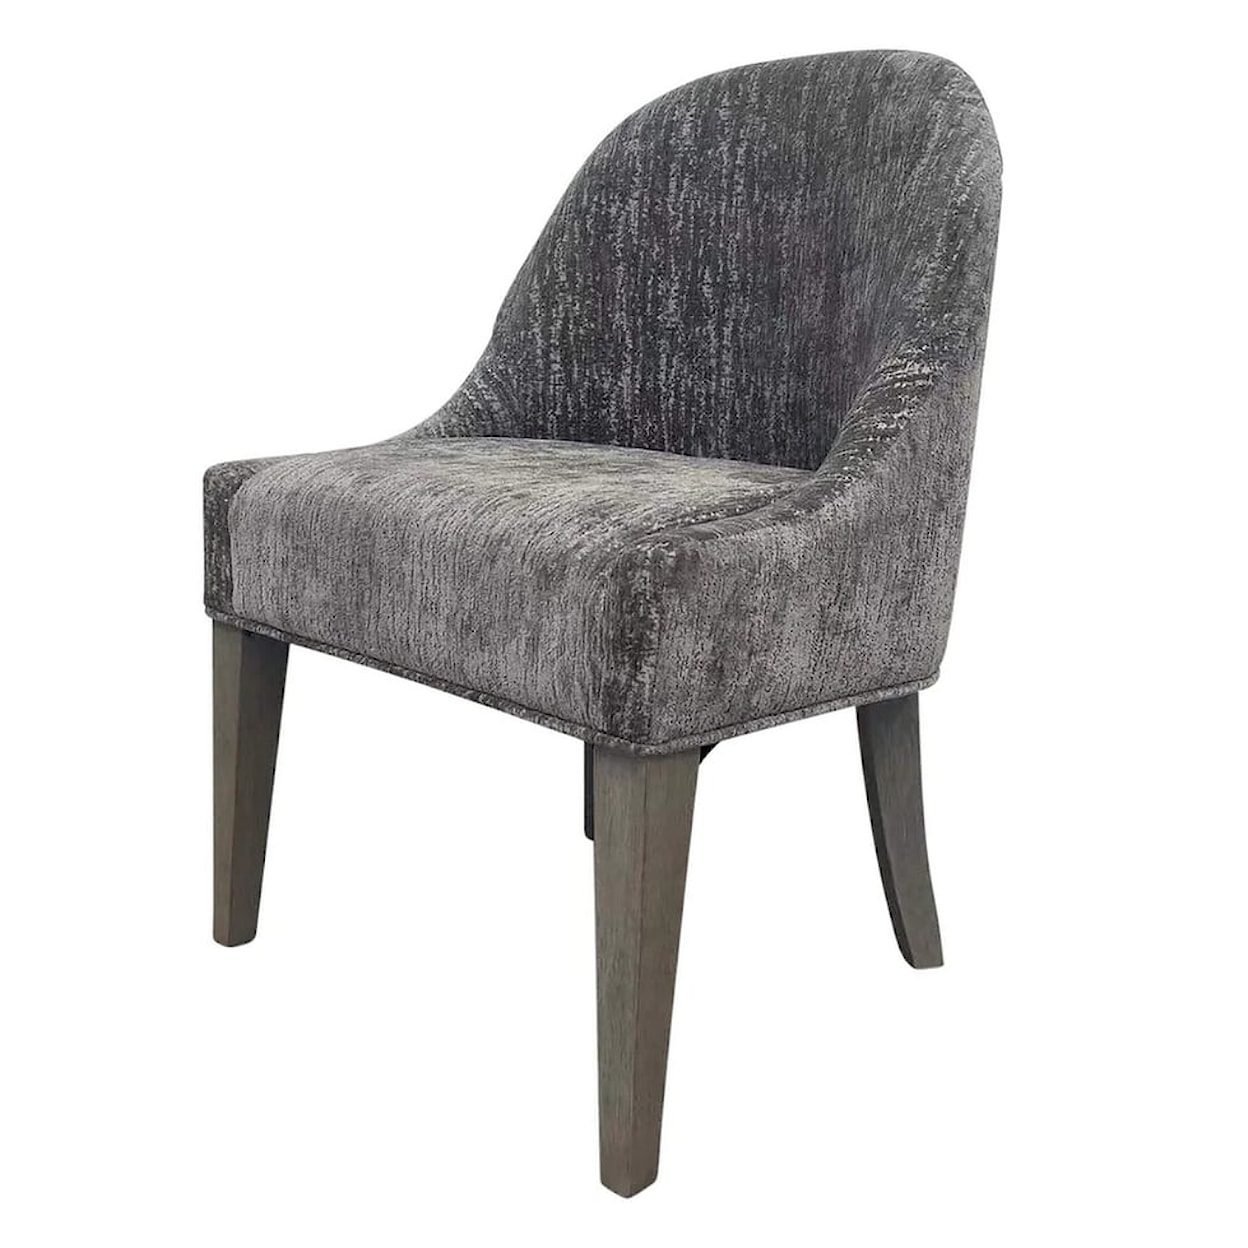 Paramount Furniture Pure Modern Upholstered Armless Side Chair